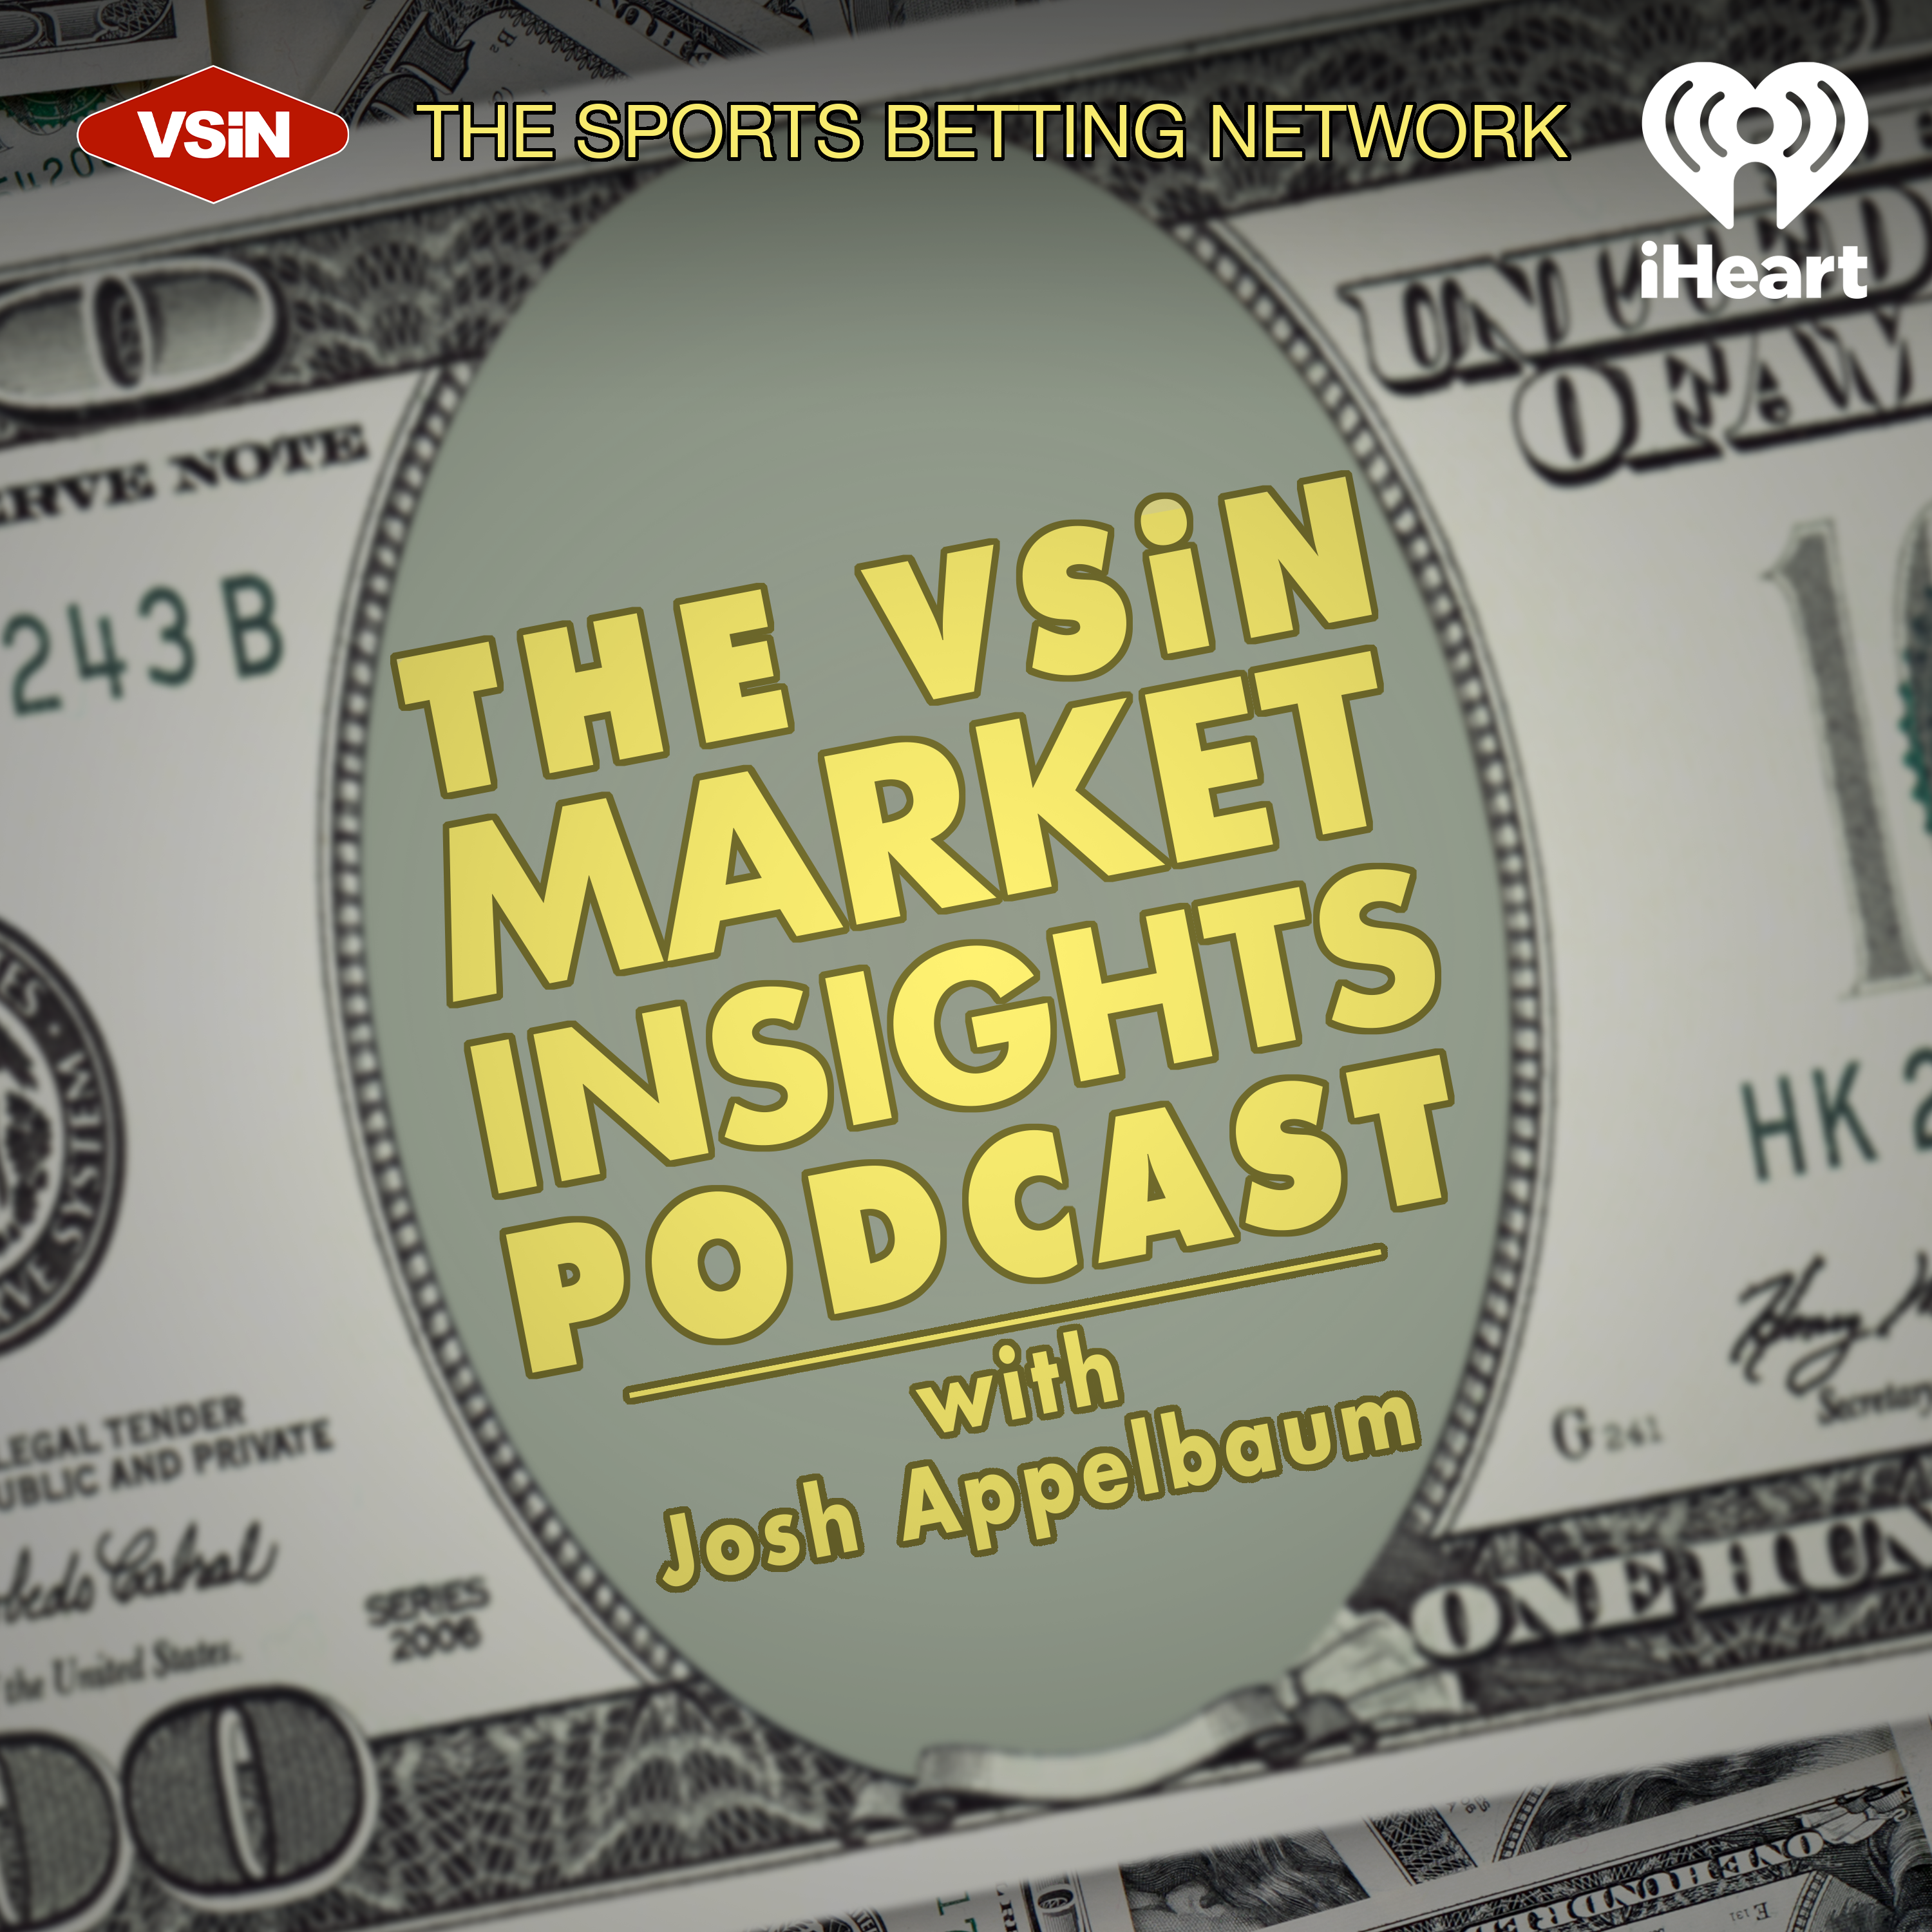 The Market Insights Podcast with Josh Appelbaum